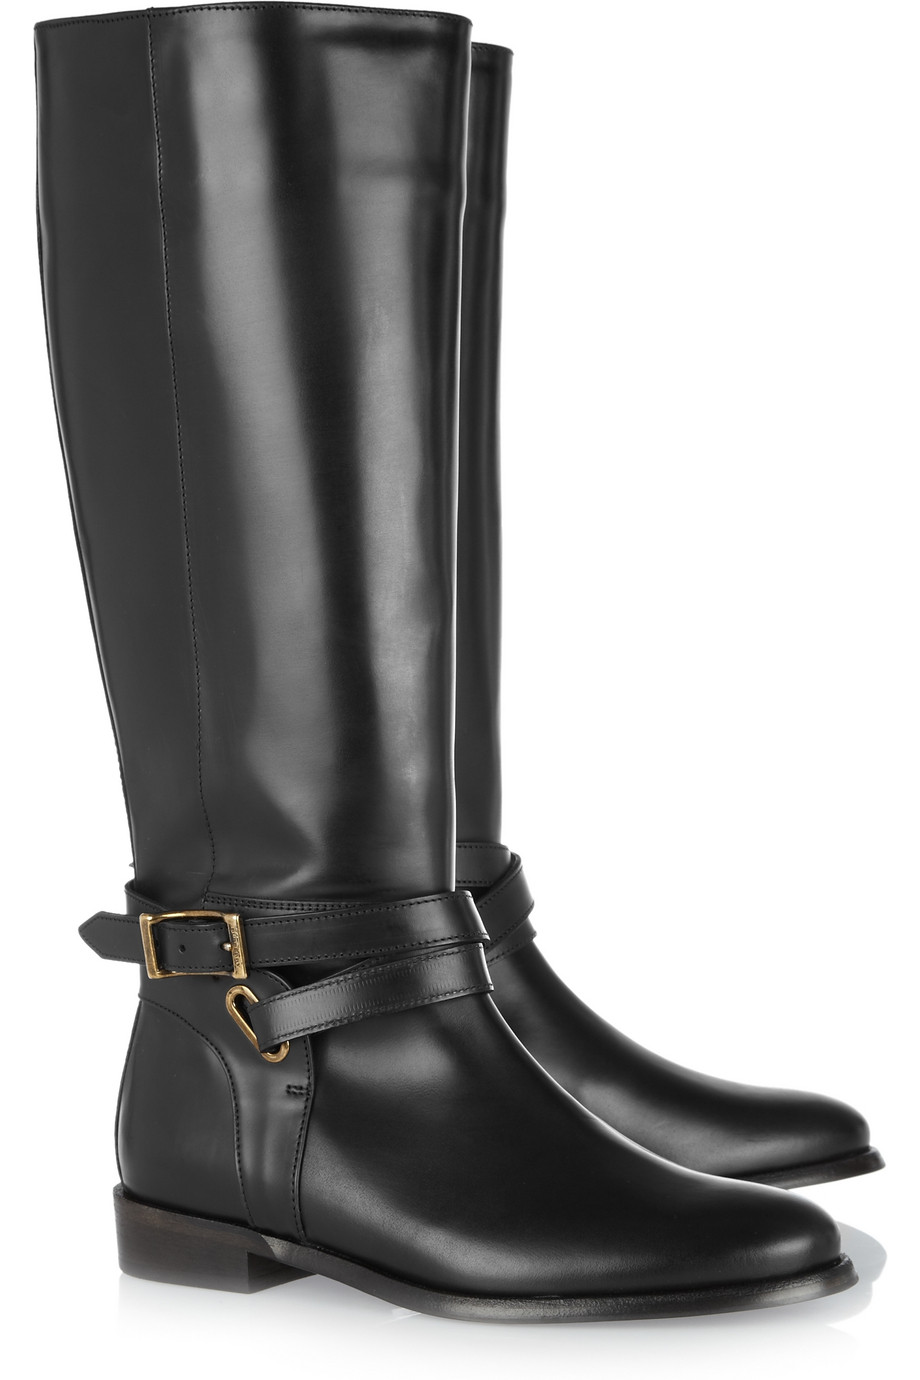 Lyst - Burberry Leather Riding Boots in Black